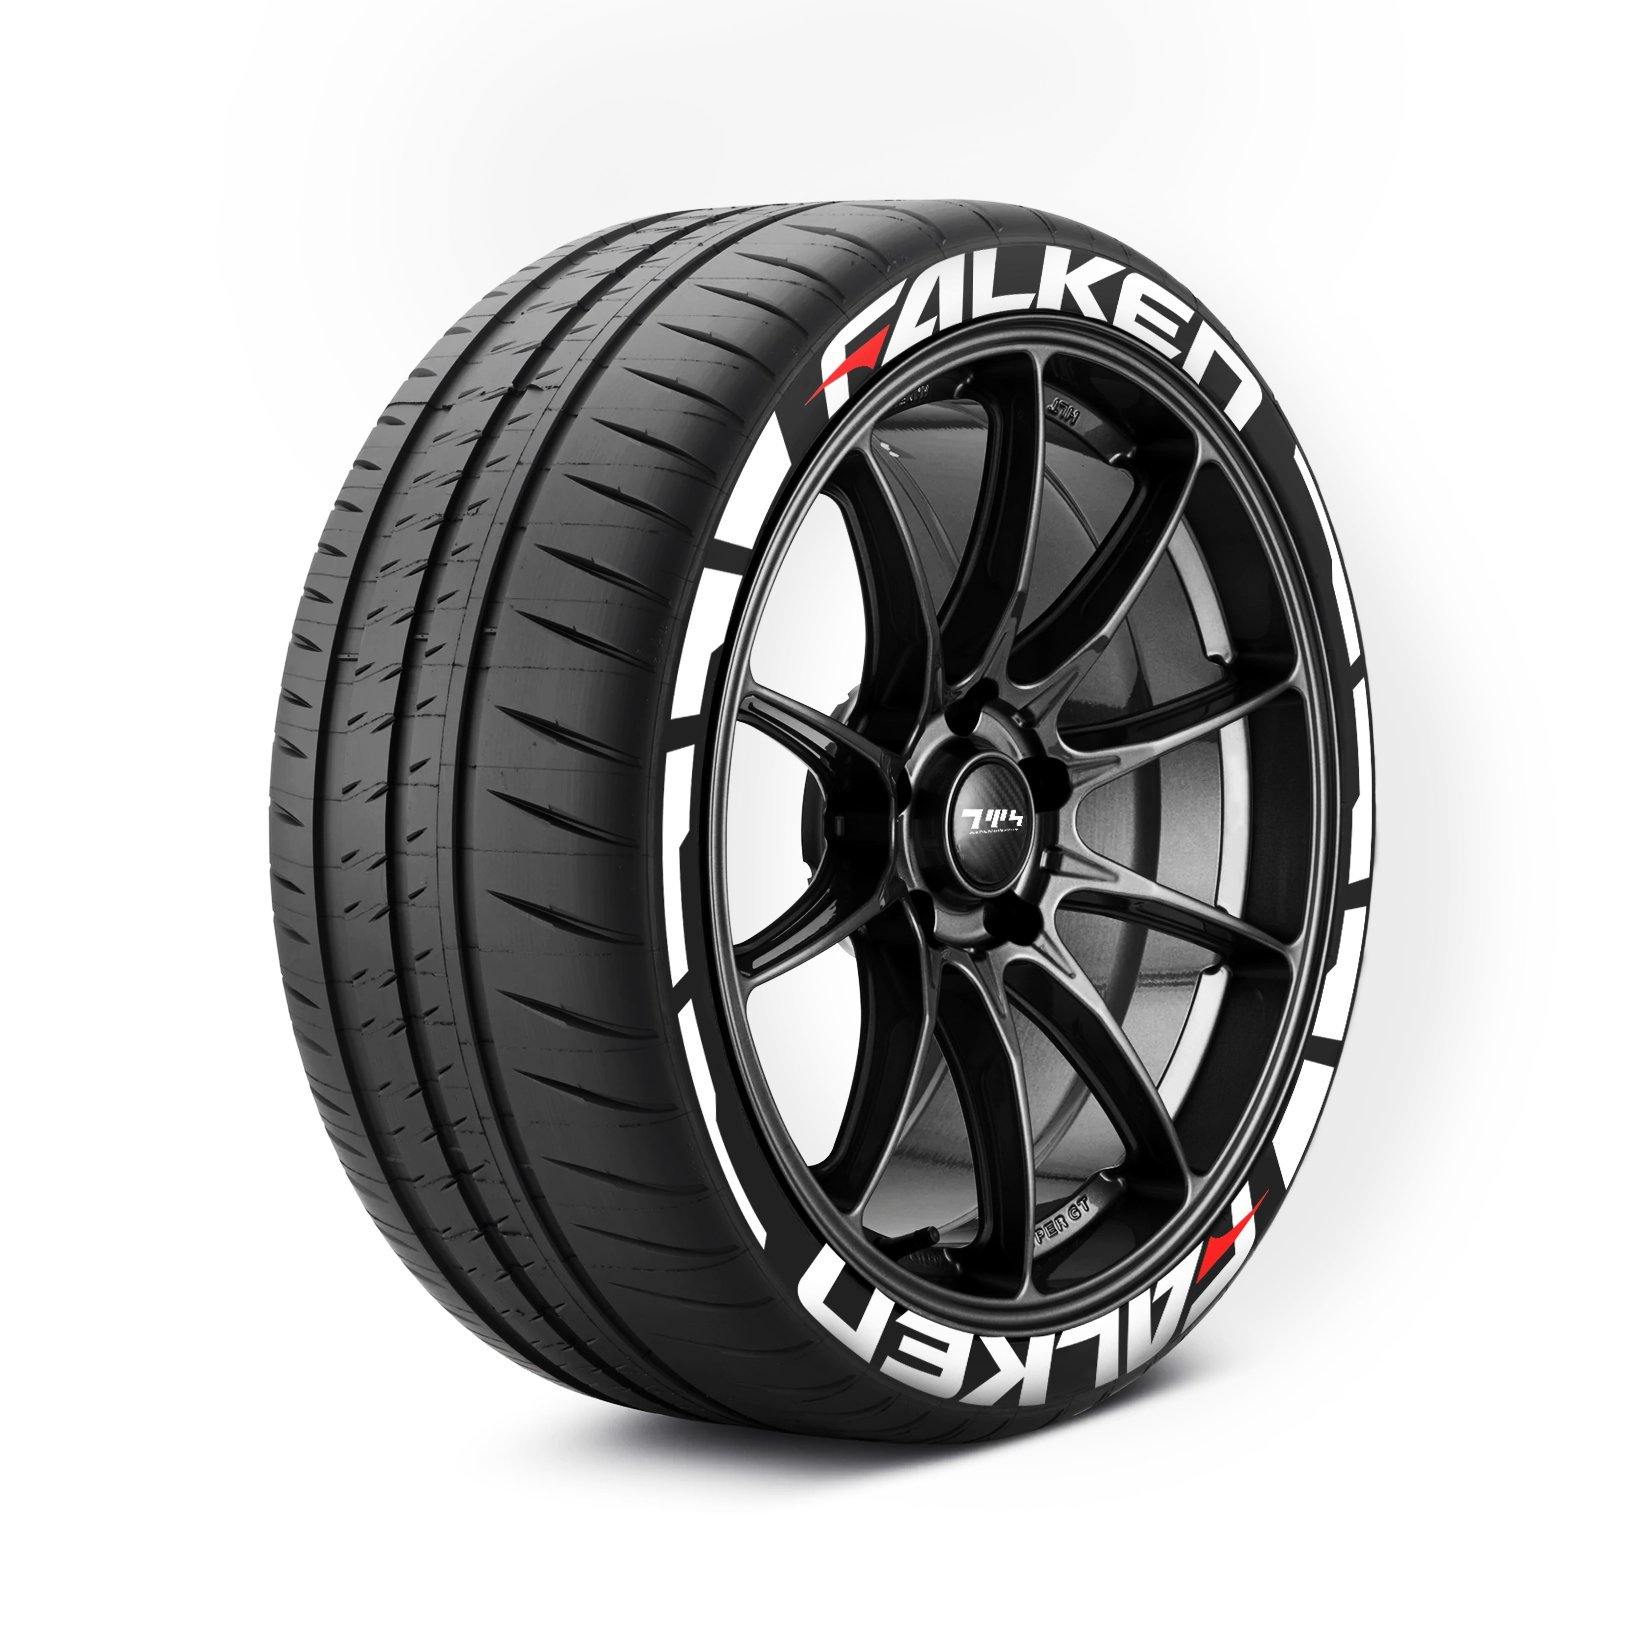 Falken Tyre Stickers With Flares - Tyre Wall Stickers